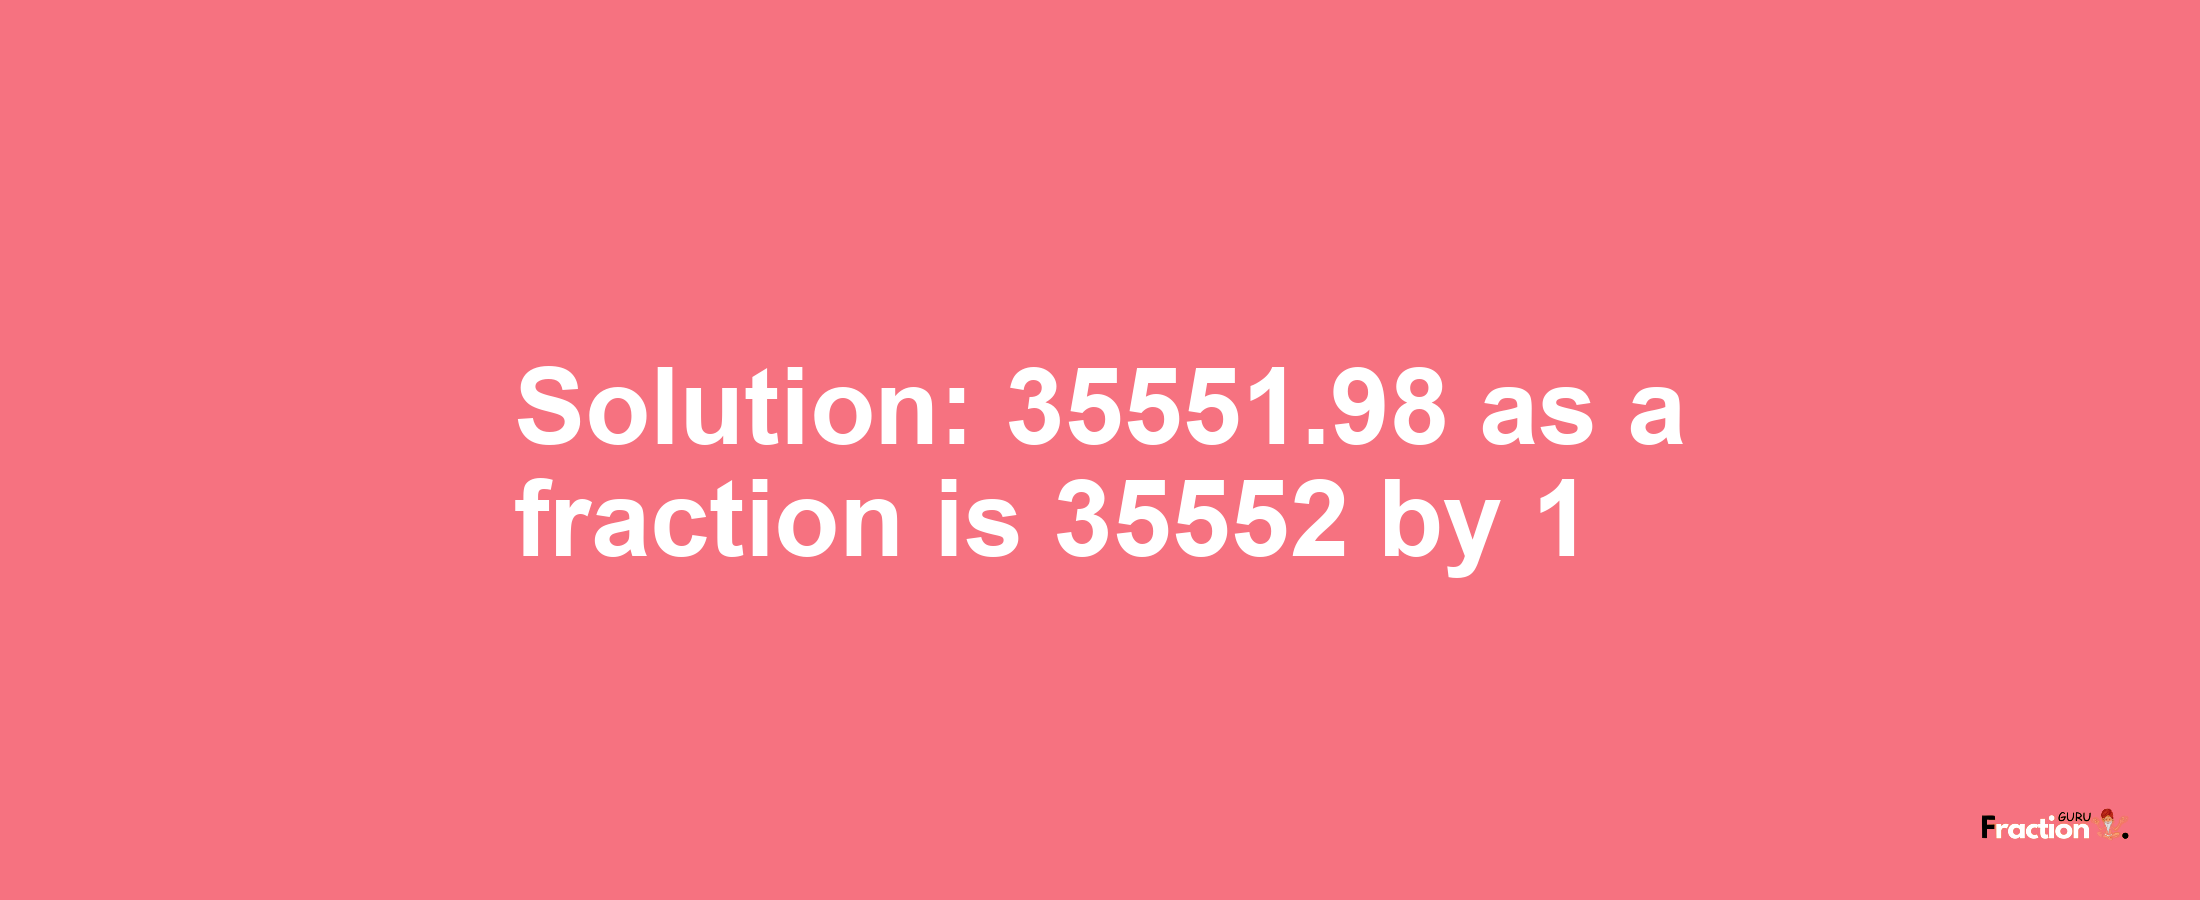 Solution:35551.98 as a fraction is 35552/1